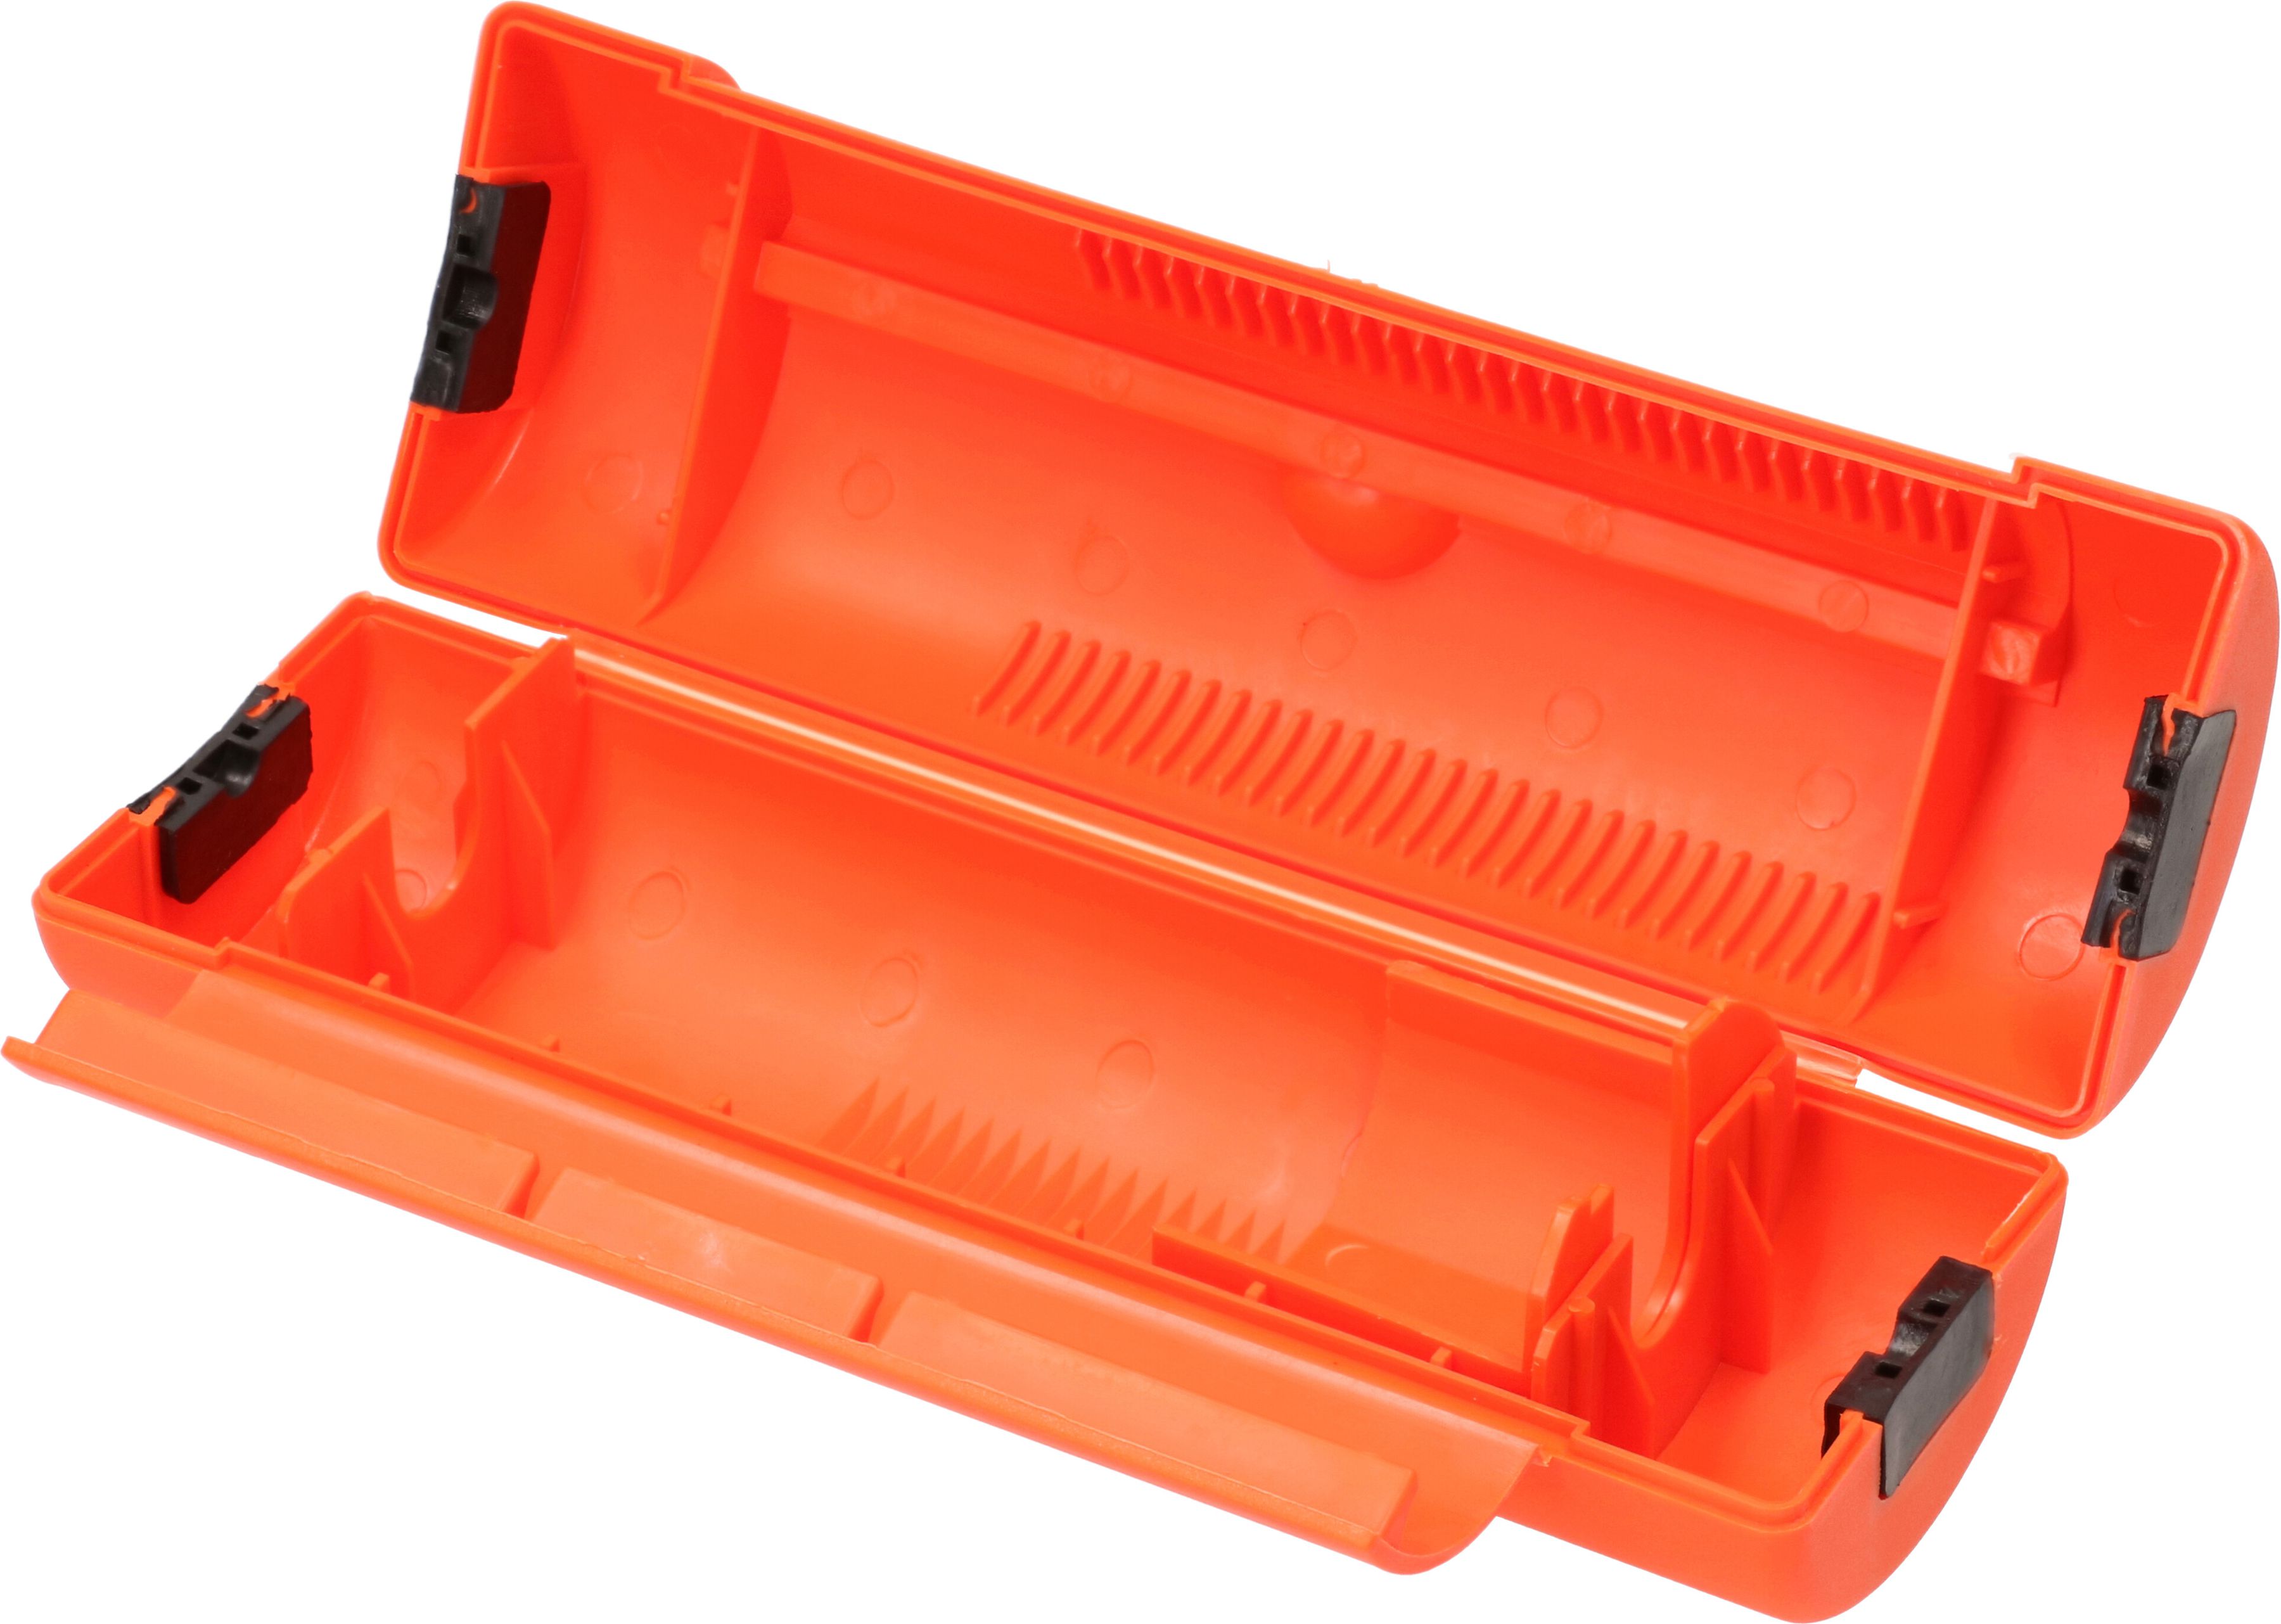 SAFETY BOX S red RAL2004 IP44